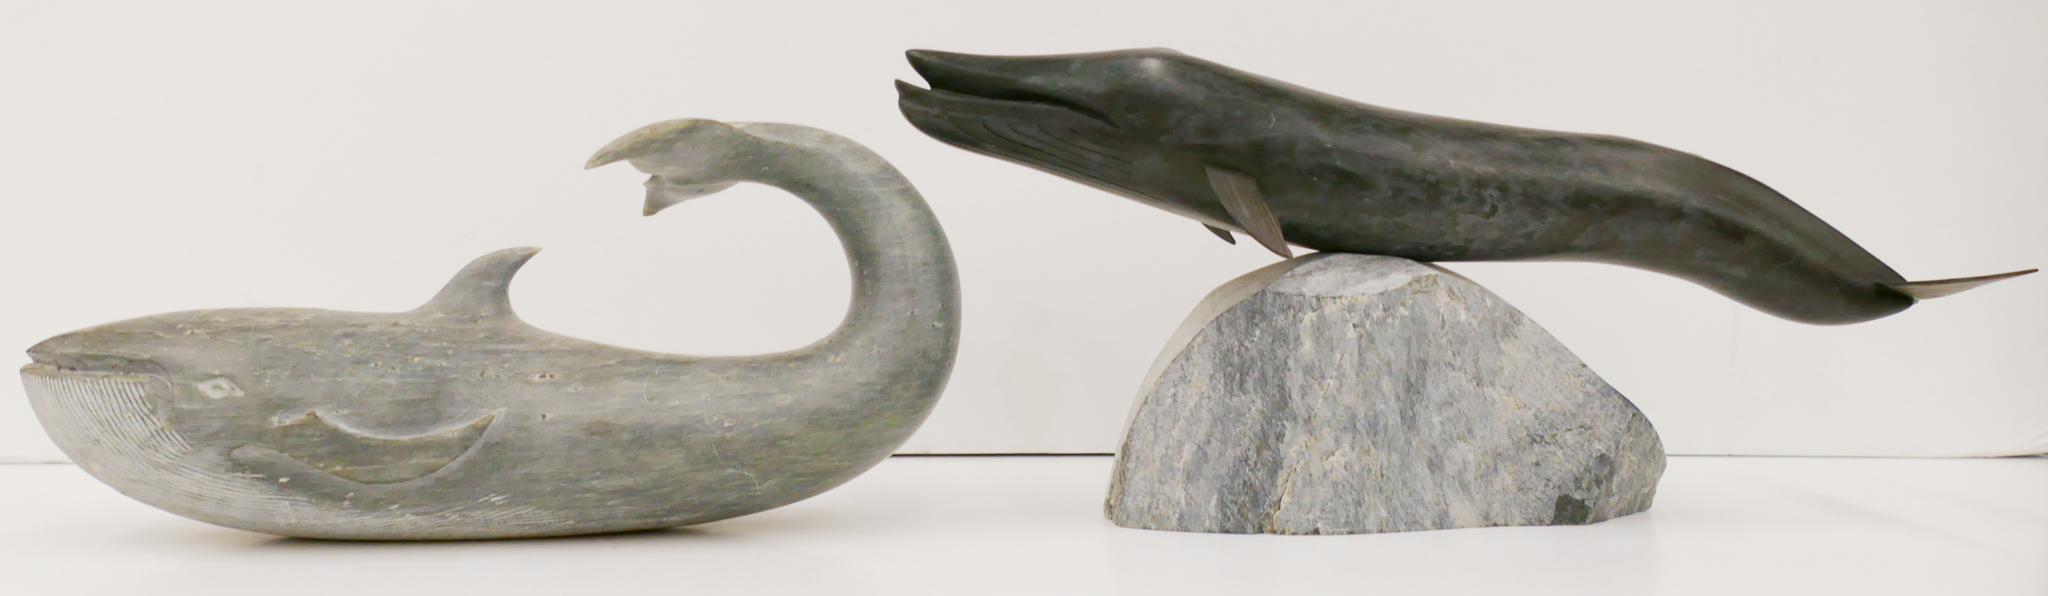 2pc Native Soapstone Whale Carvings 2af711